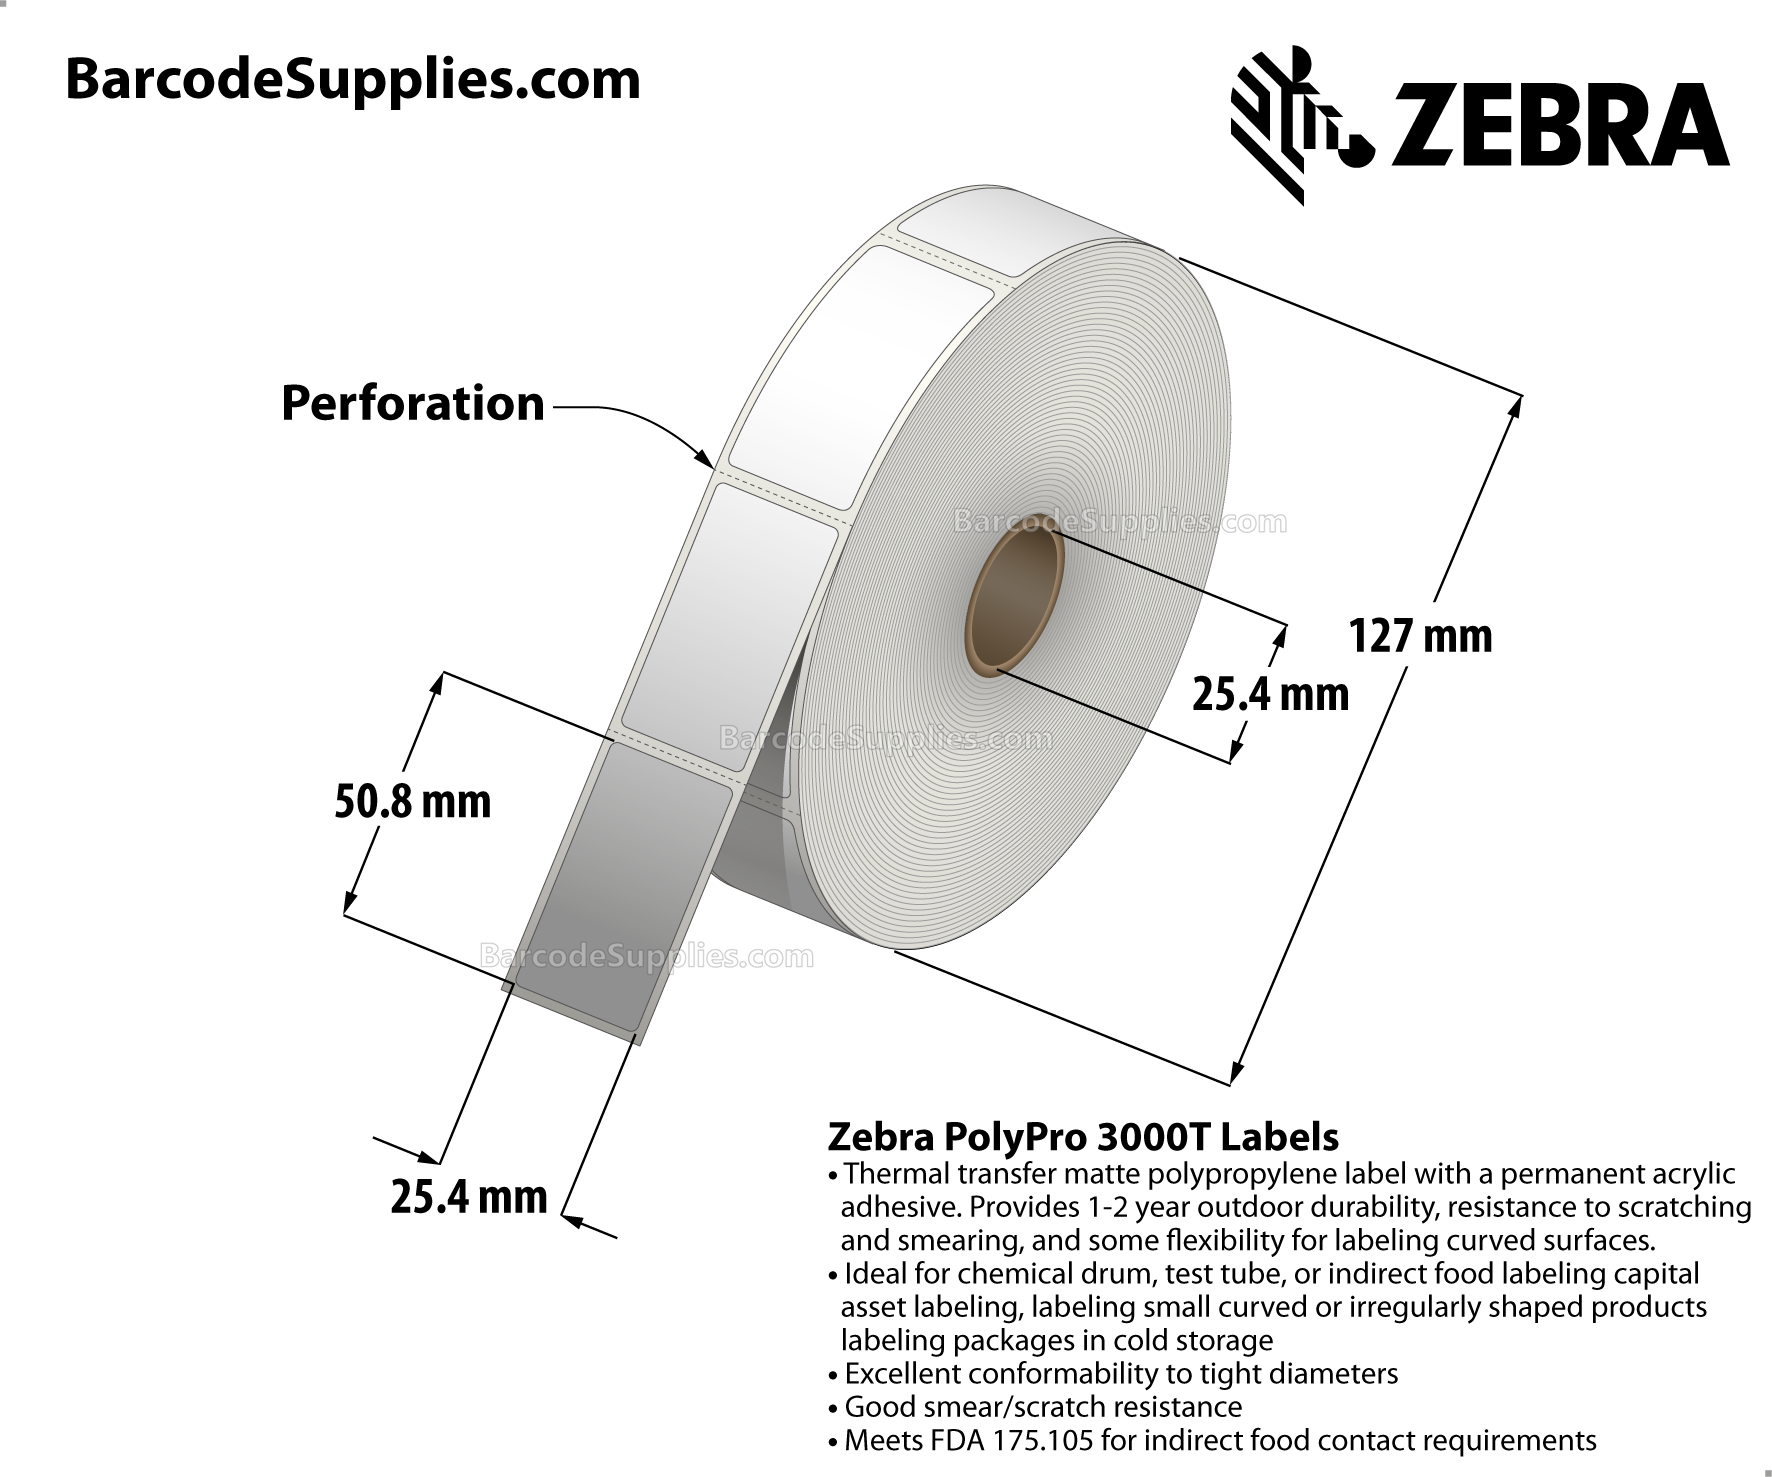 1 x 2 Thermal Transfer White PolyPro 3000T Labels With Permanent Adhesive - Perforated - 1110 Labels Per Roll - Carton Of 1 Rolls - 1110 Labels Total - MPN: 10023332